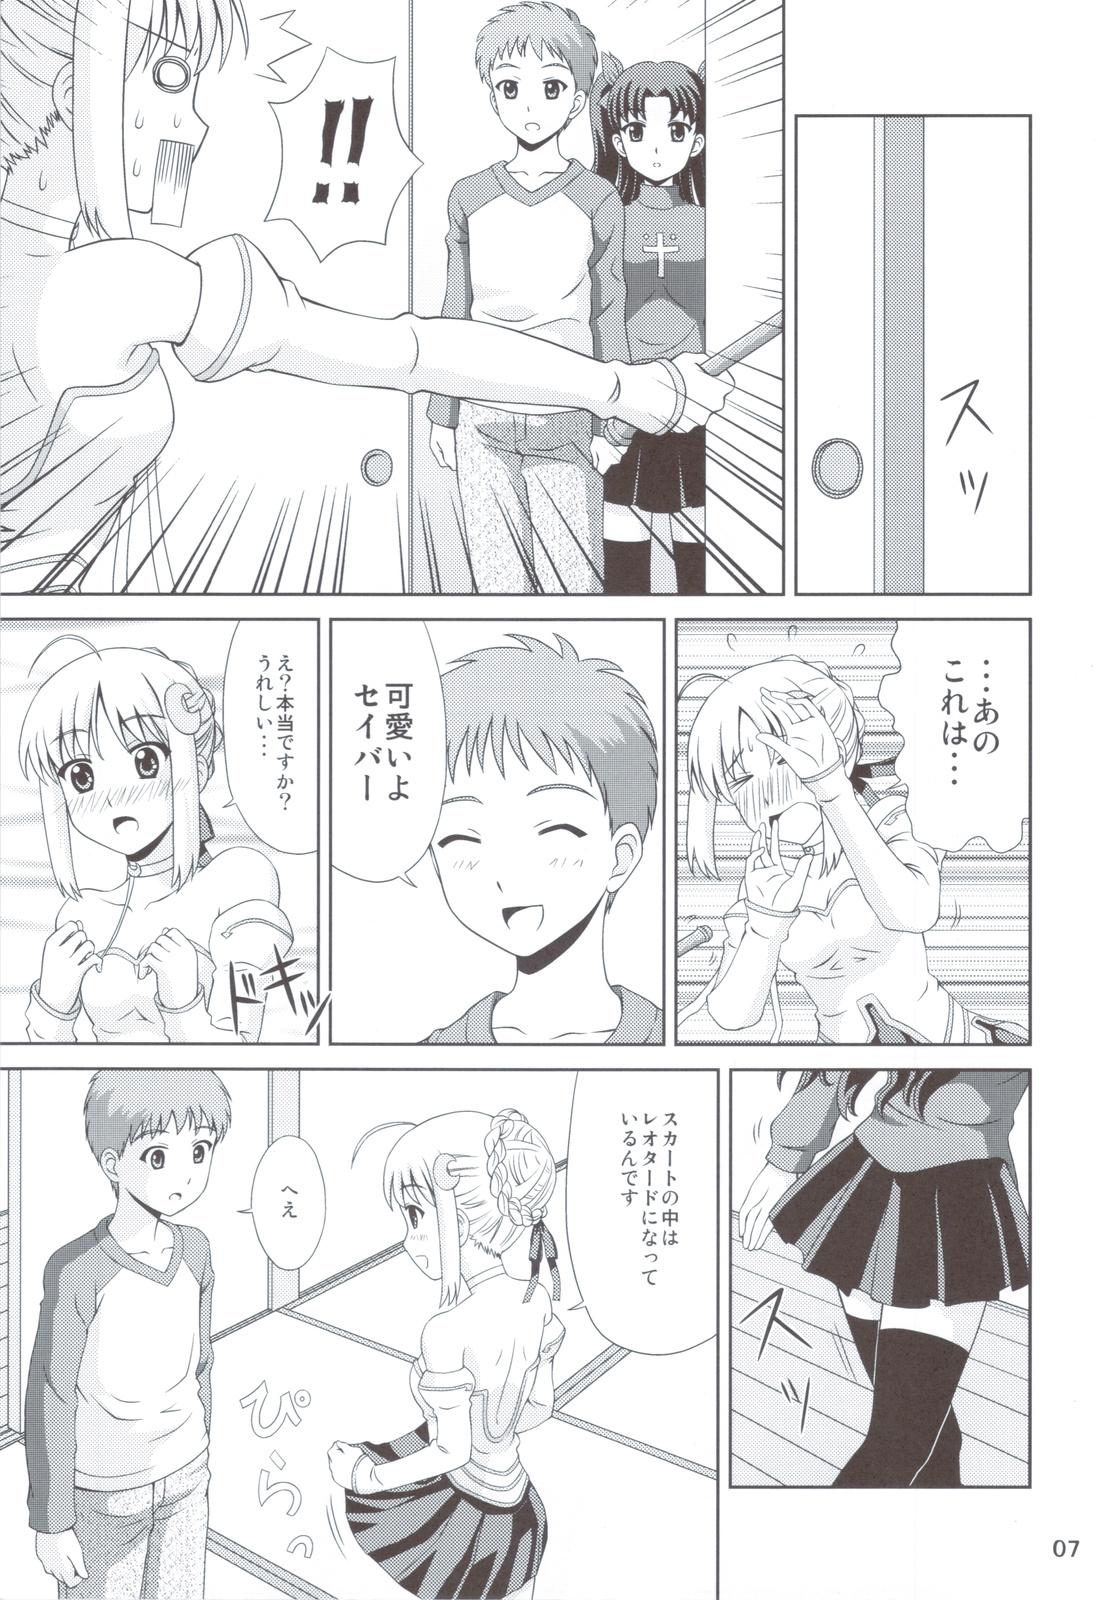 Jerking Carni Phan tic Factory 2 - Fate stay night Fate zero Hot Naked Women - Page 6